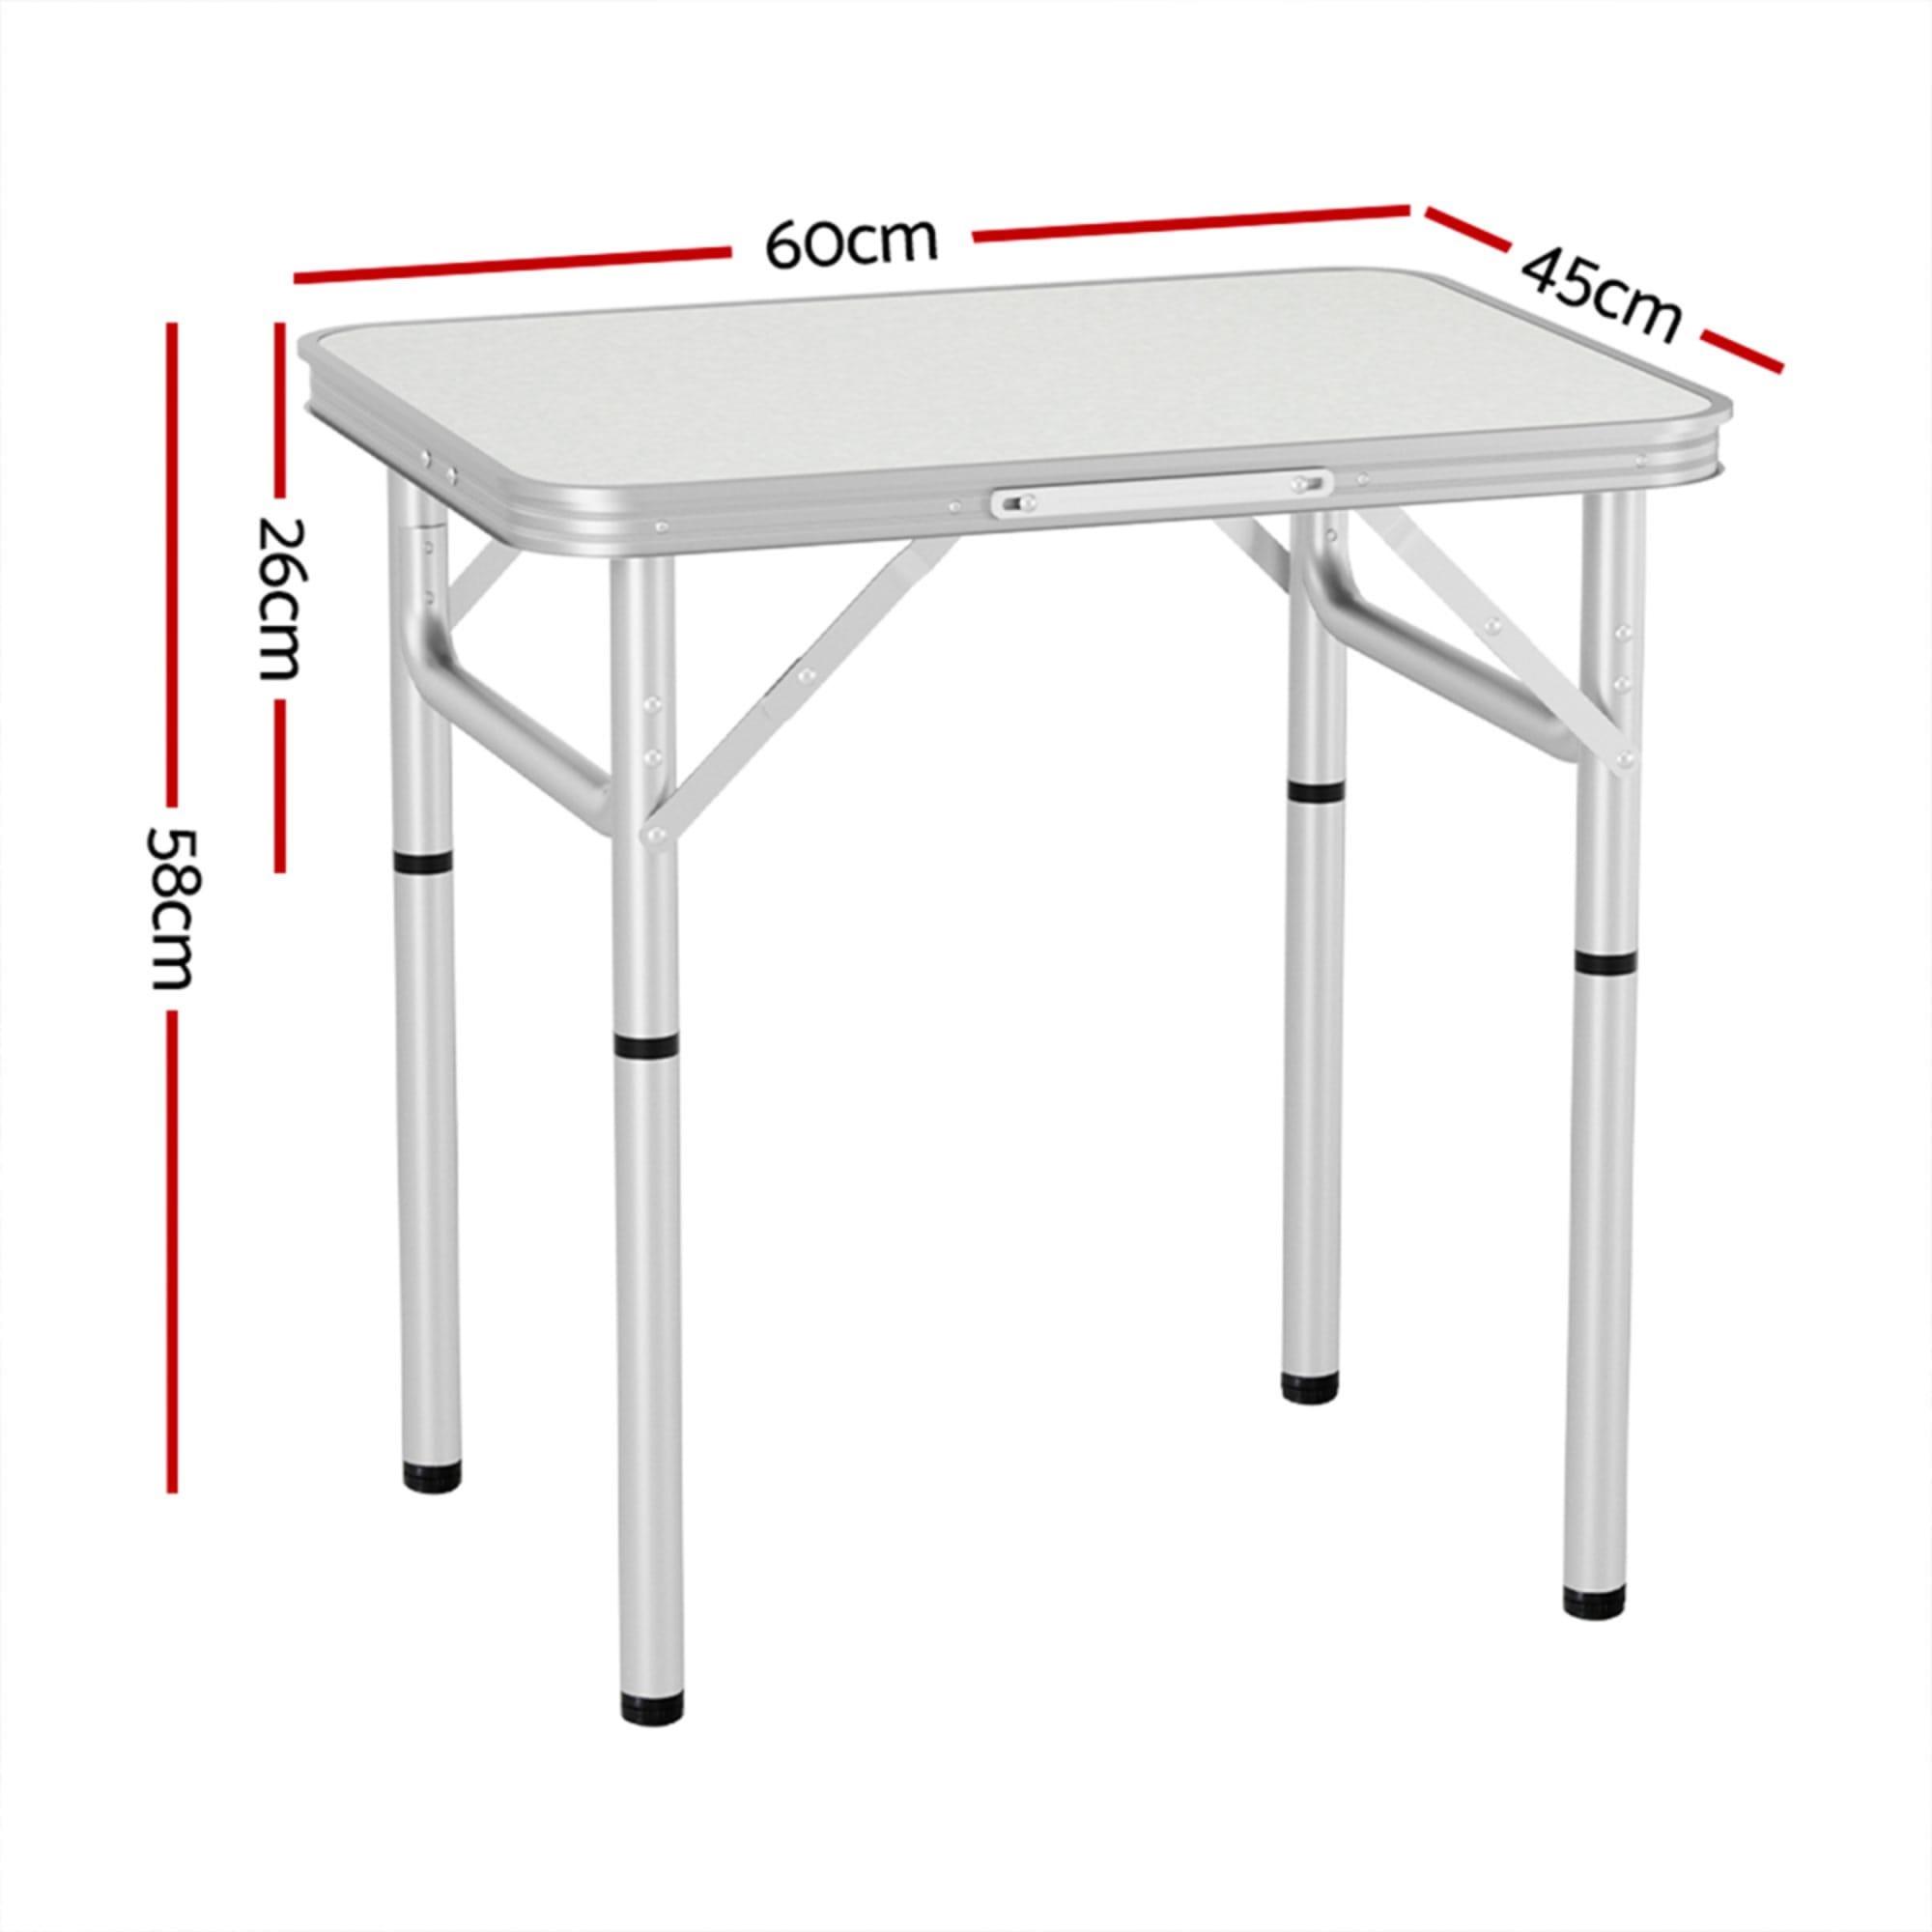 Weisshorn Camping Table 60cm Image 3